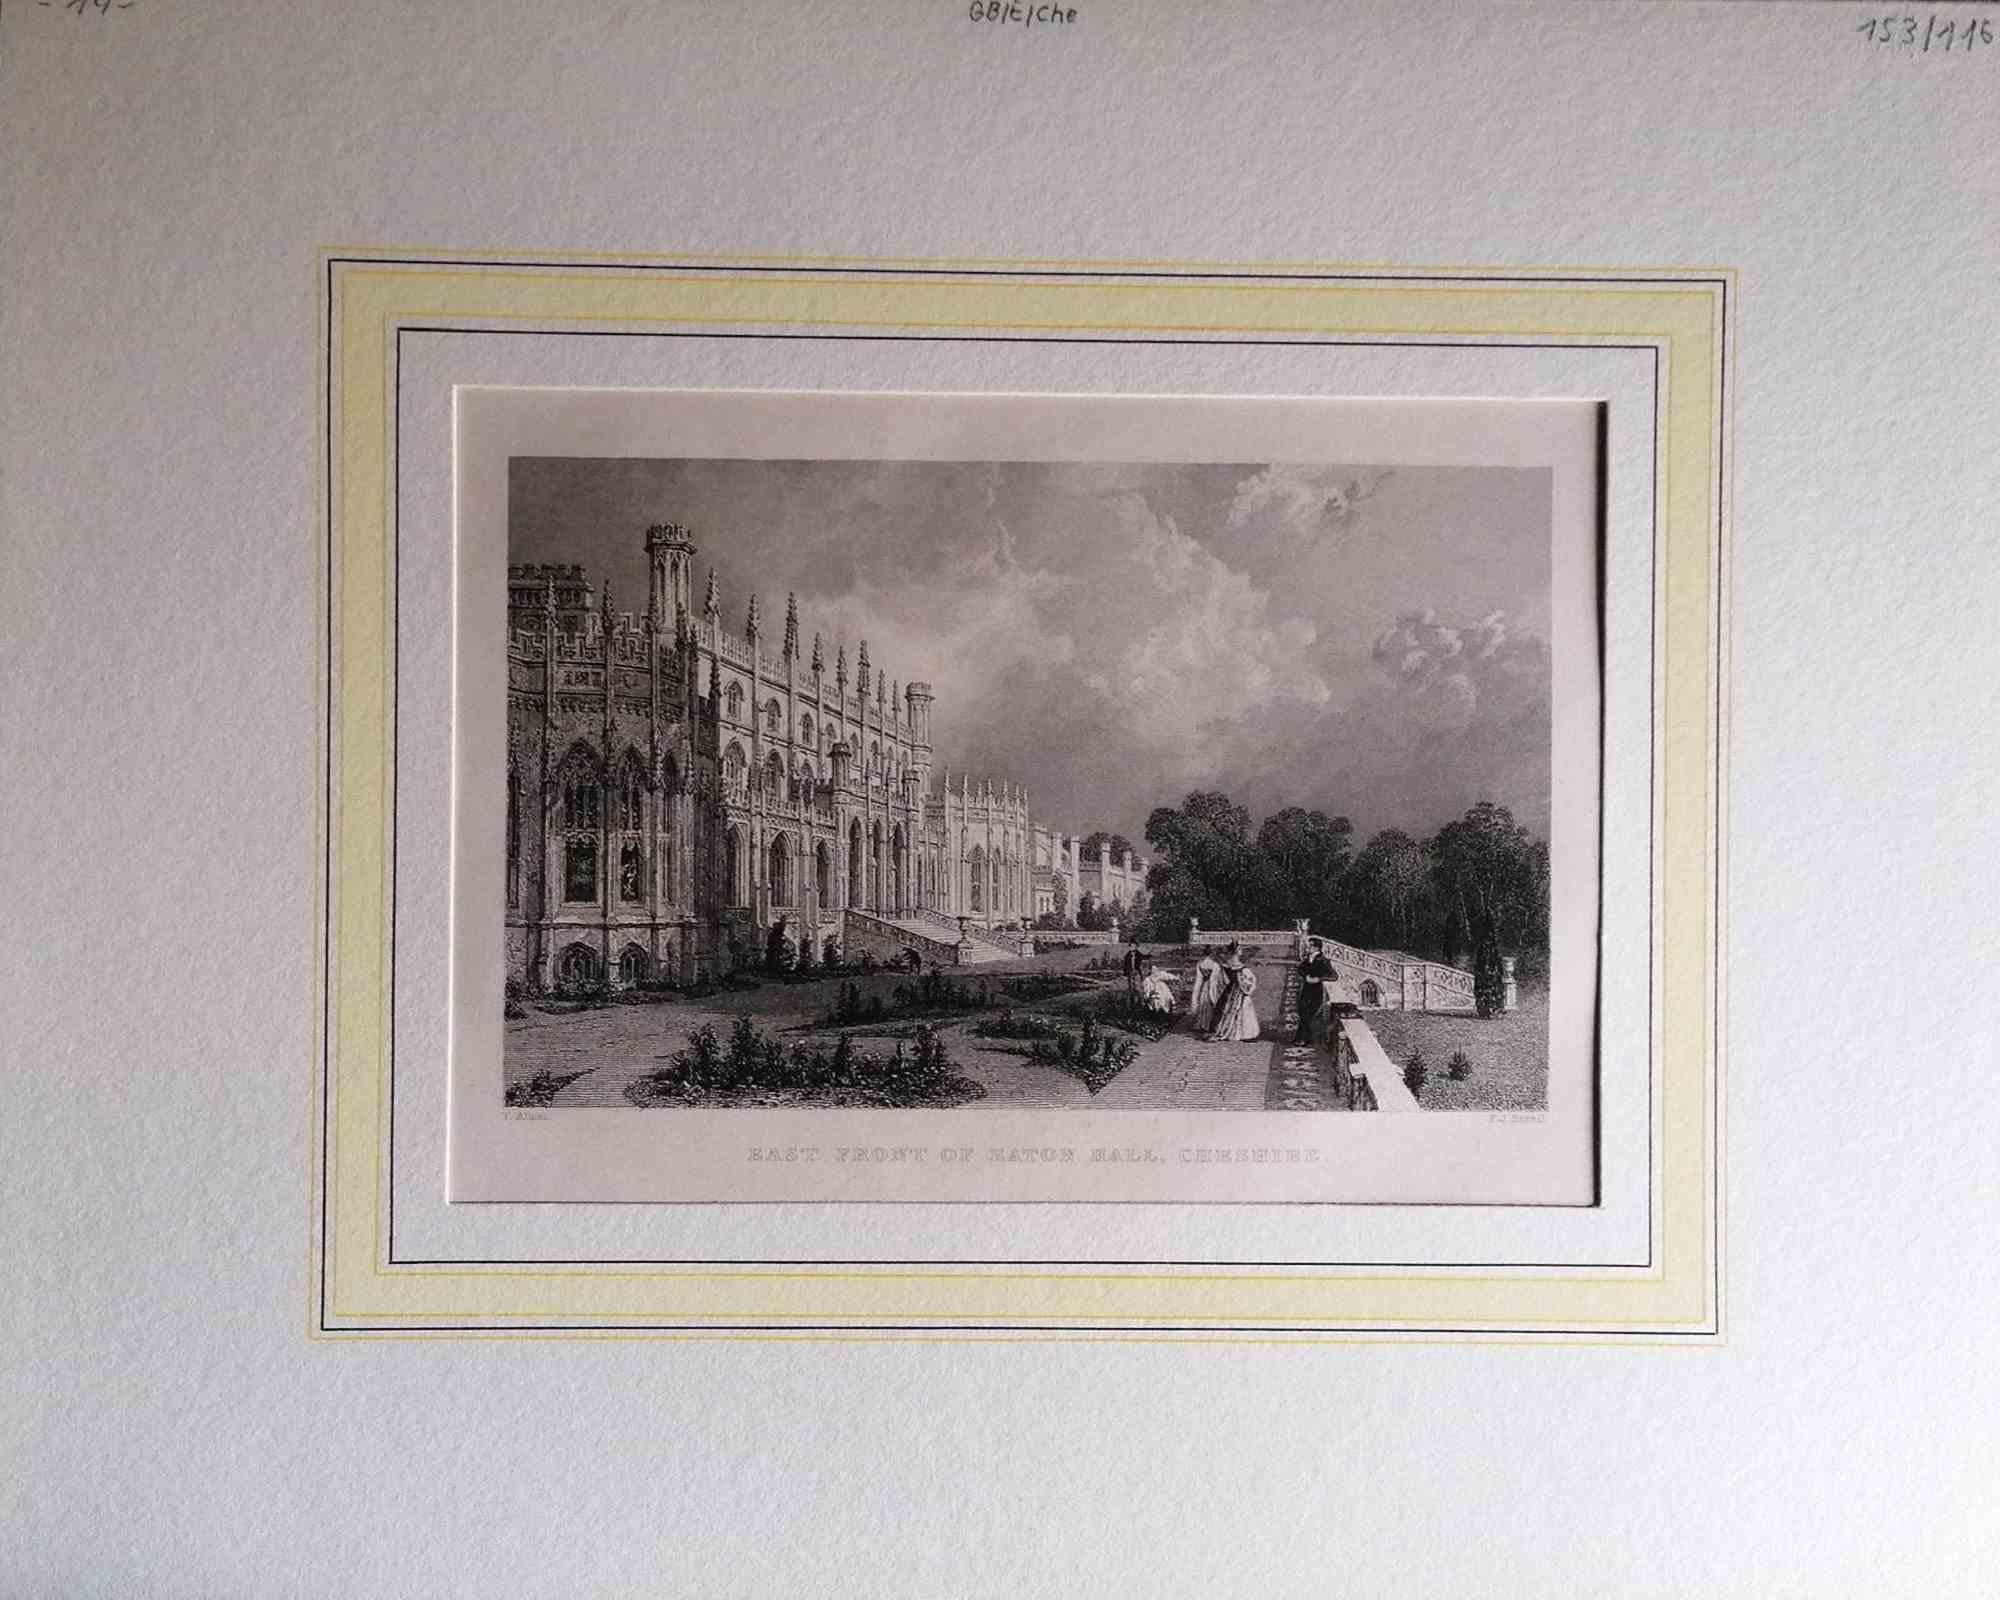 Unknown Figurative Print - Ancient View of Eaton Hall - Original Lithograph - Mid-19th Century